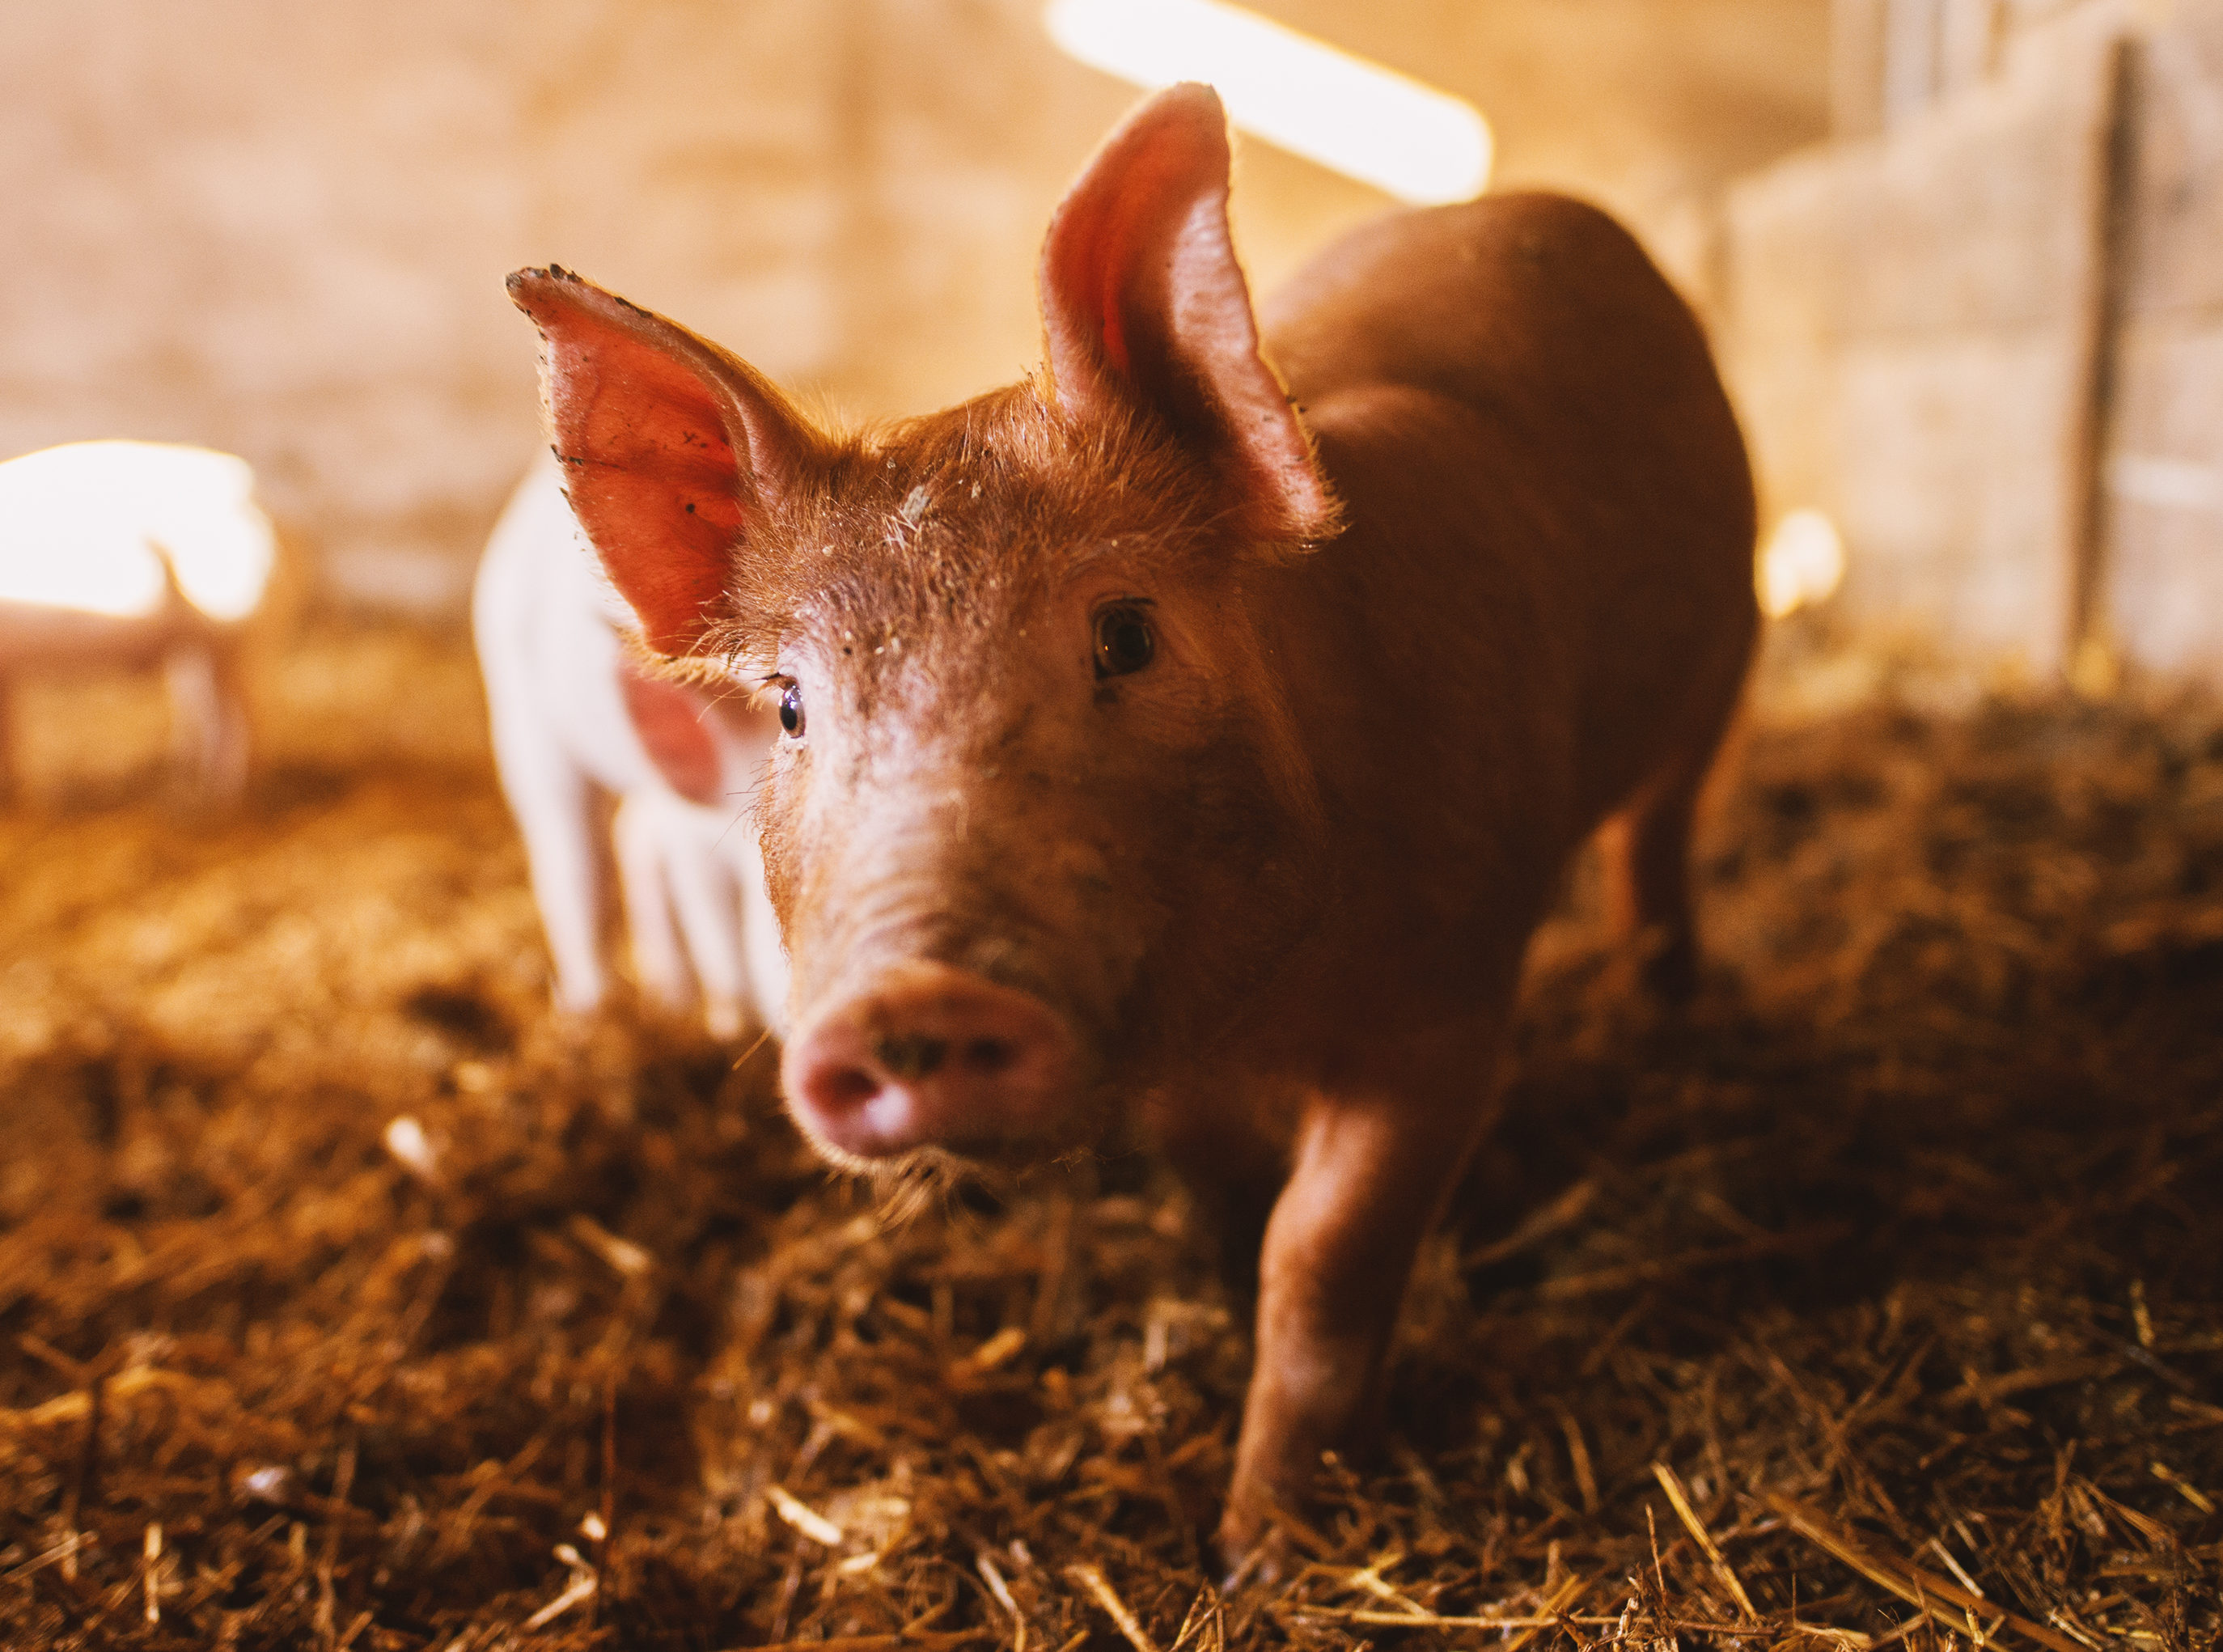 The National Pig Association has outlined its concerns to Channel 4.